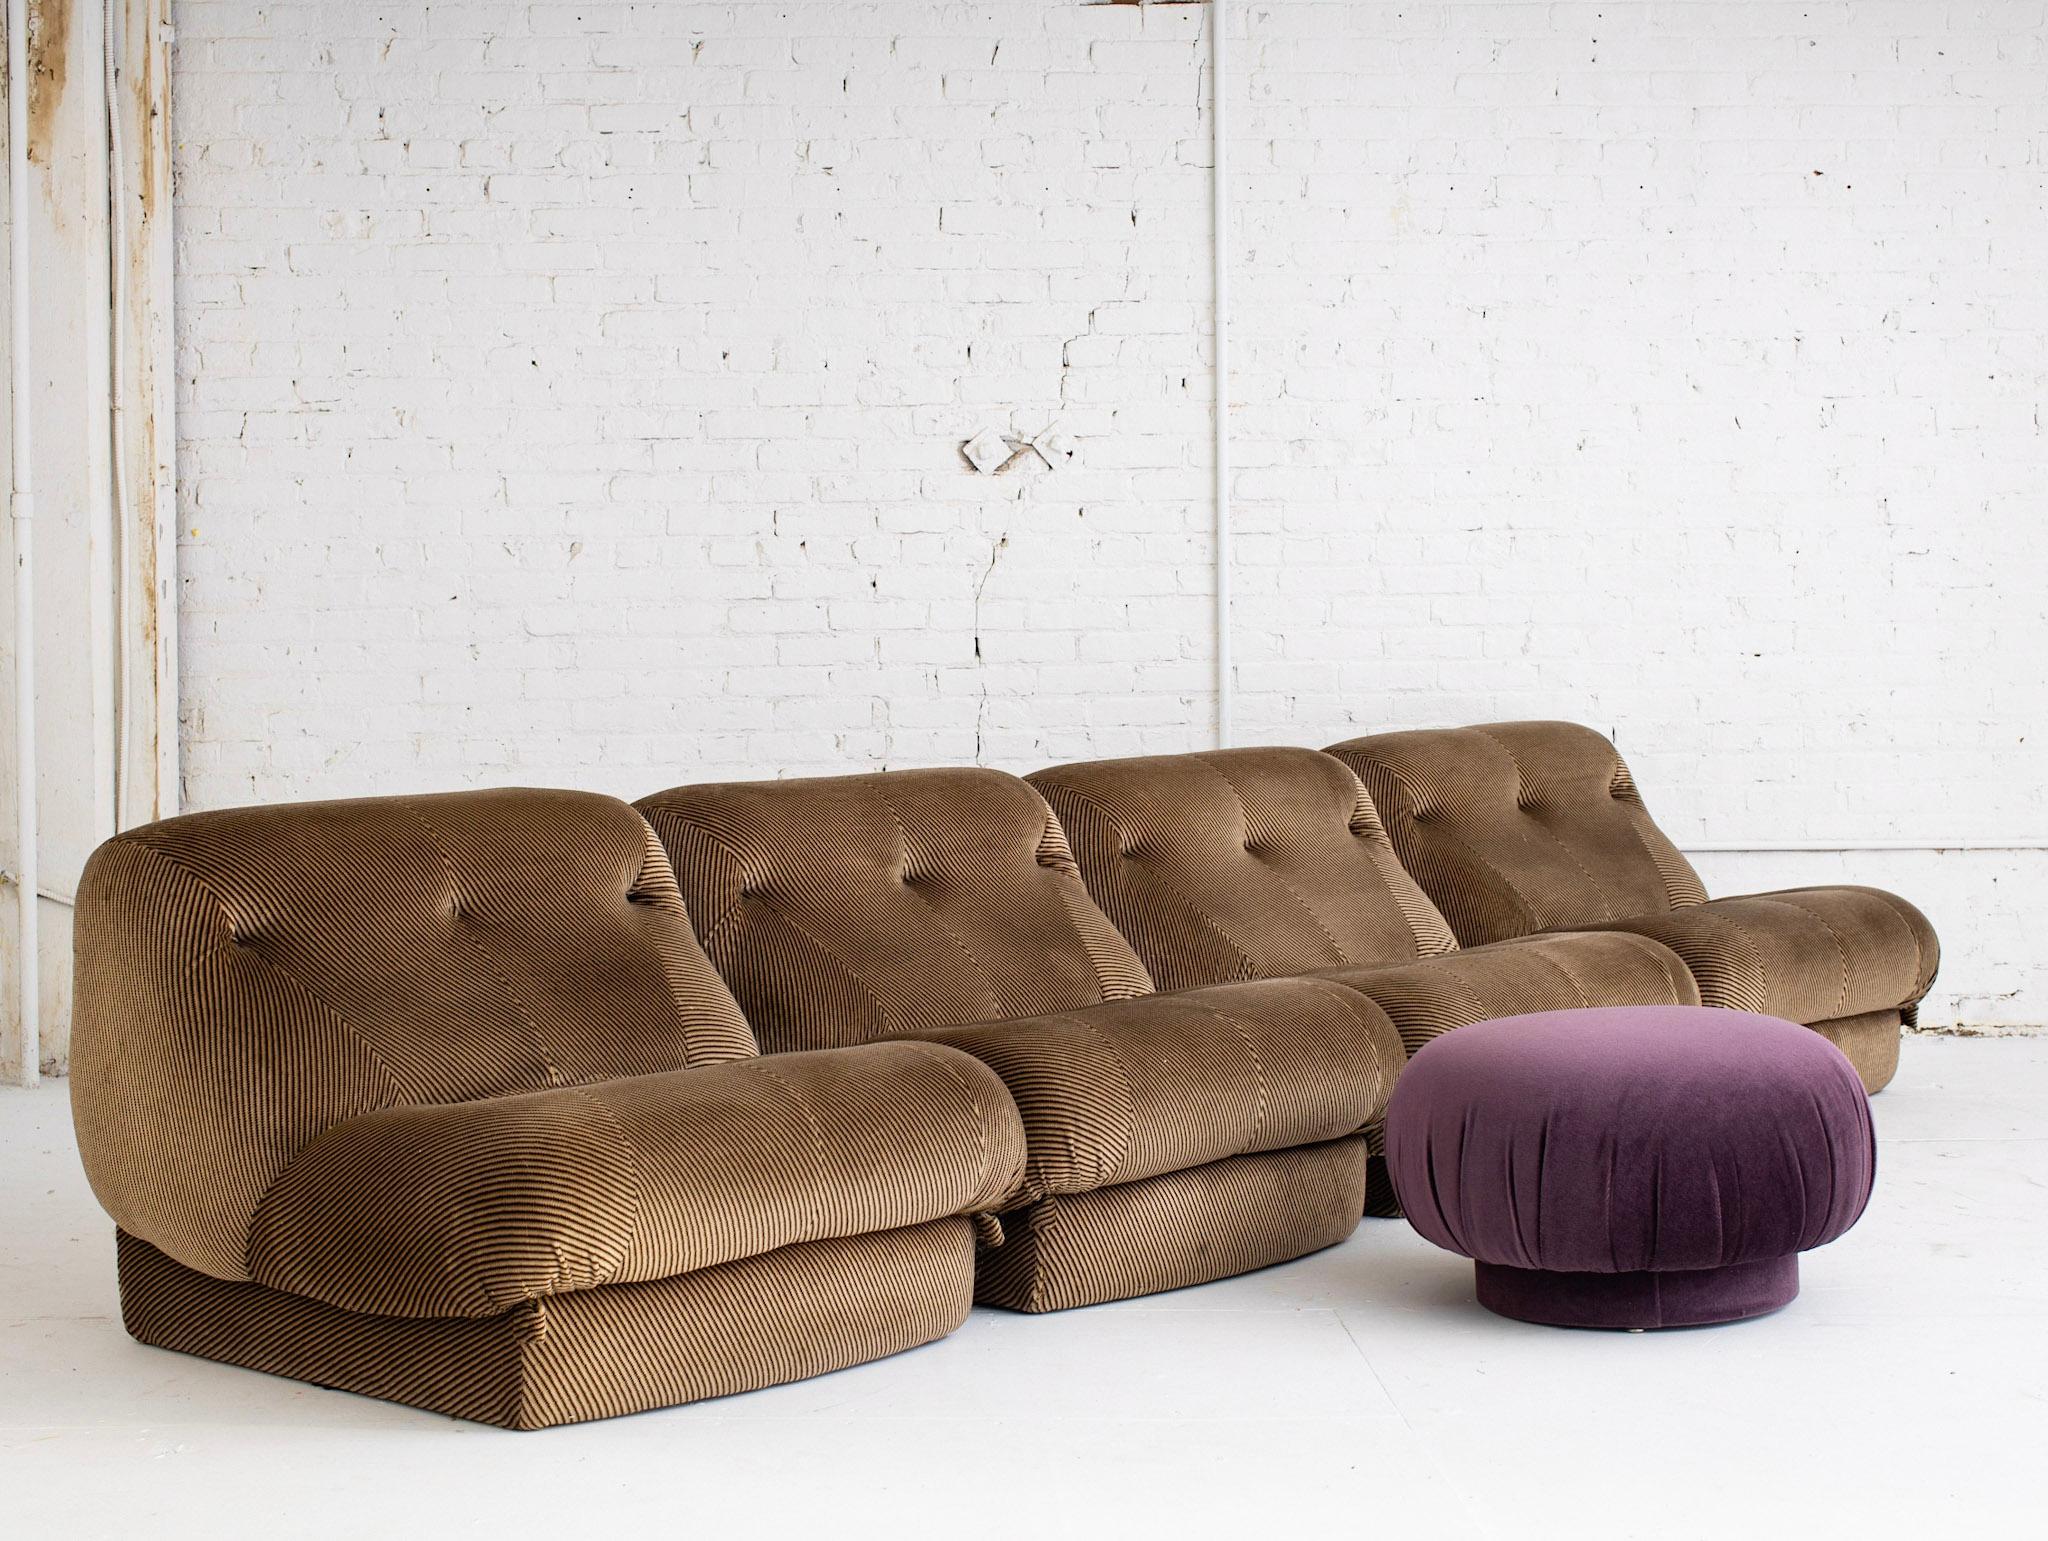 Italian 4 Piece Modular Sectional Attributed to Rino Maturi for Mimo Leone and C 14